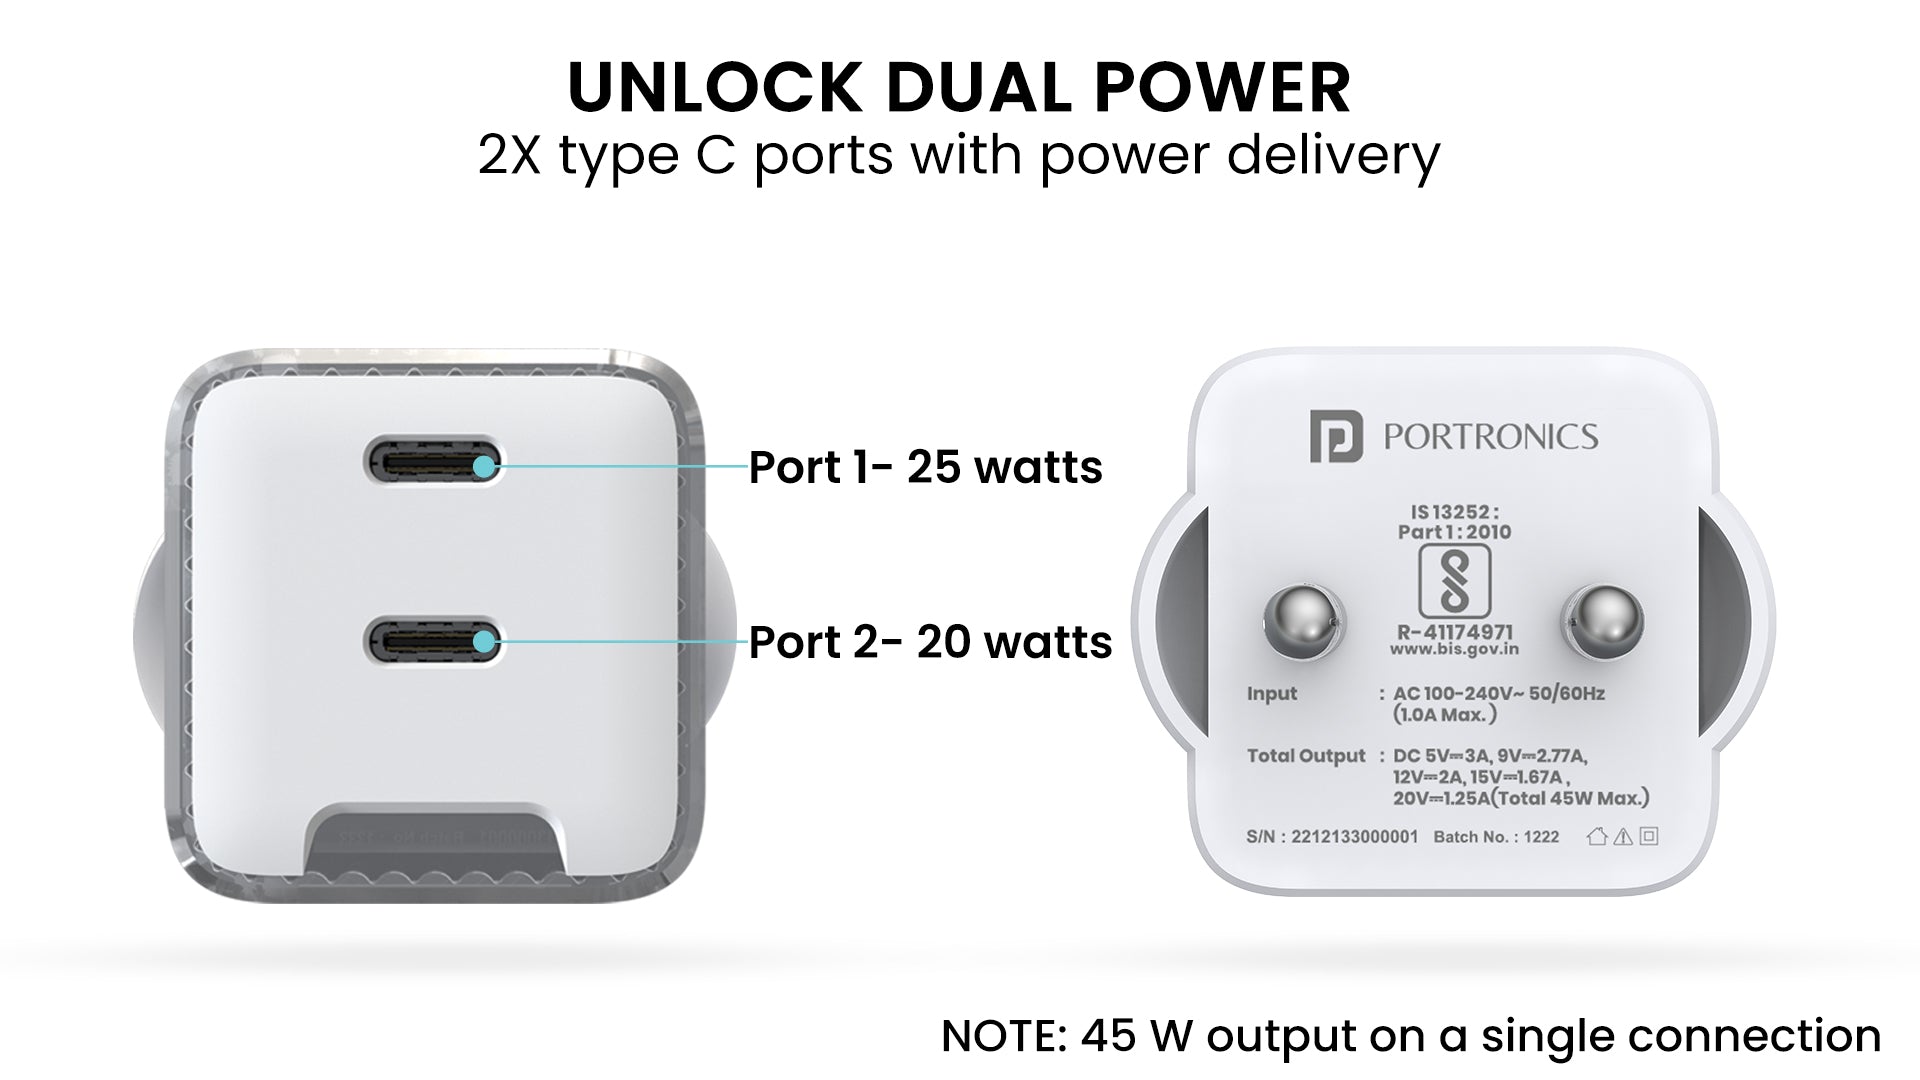 Adapto 4 - 20W Type-C PD Charger/Adapter with Fast Charging